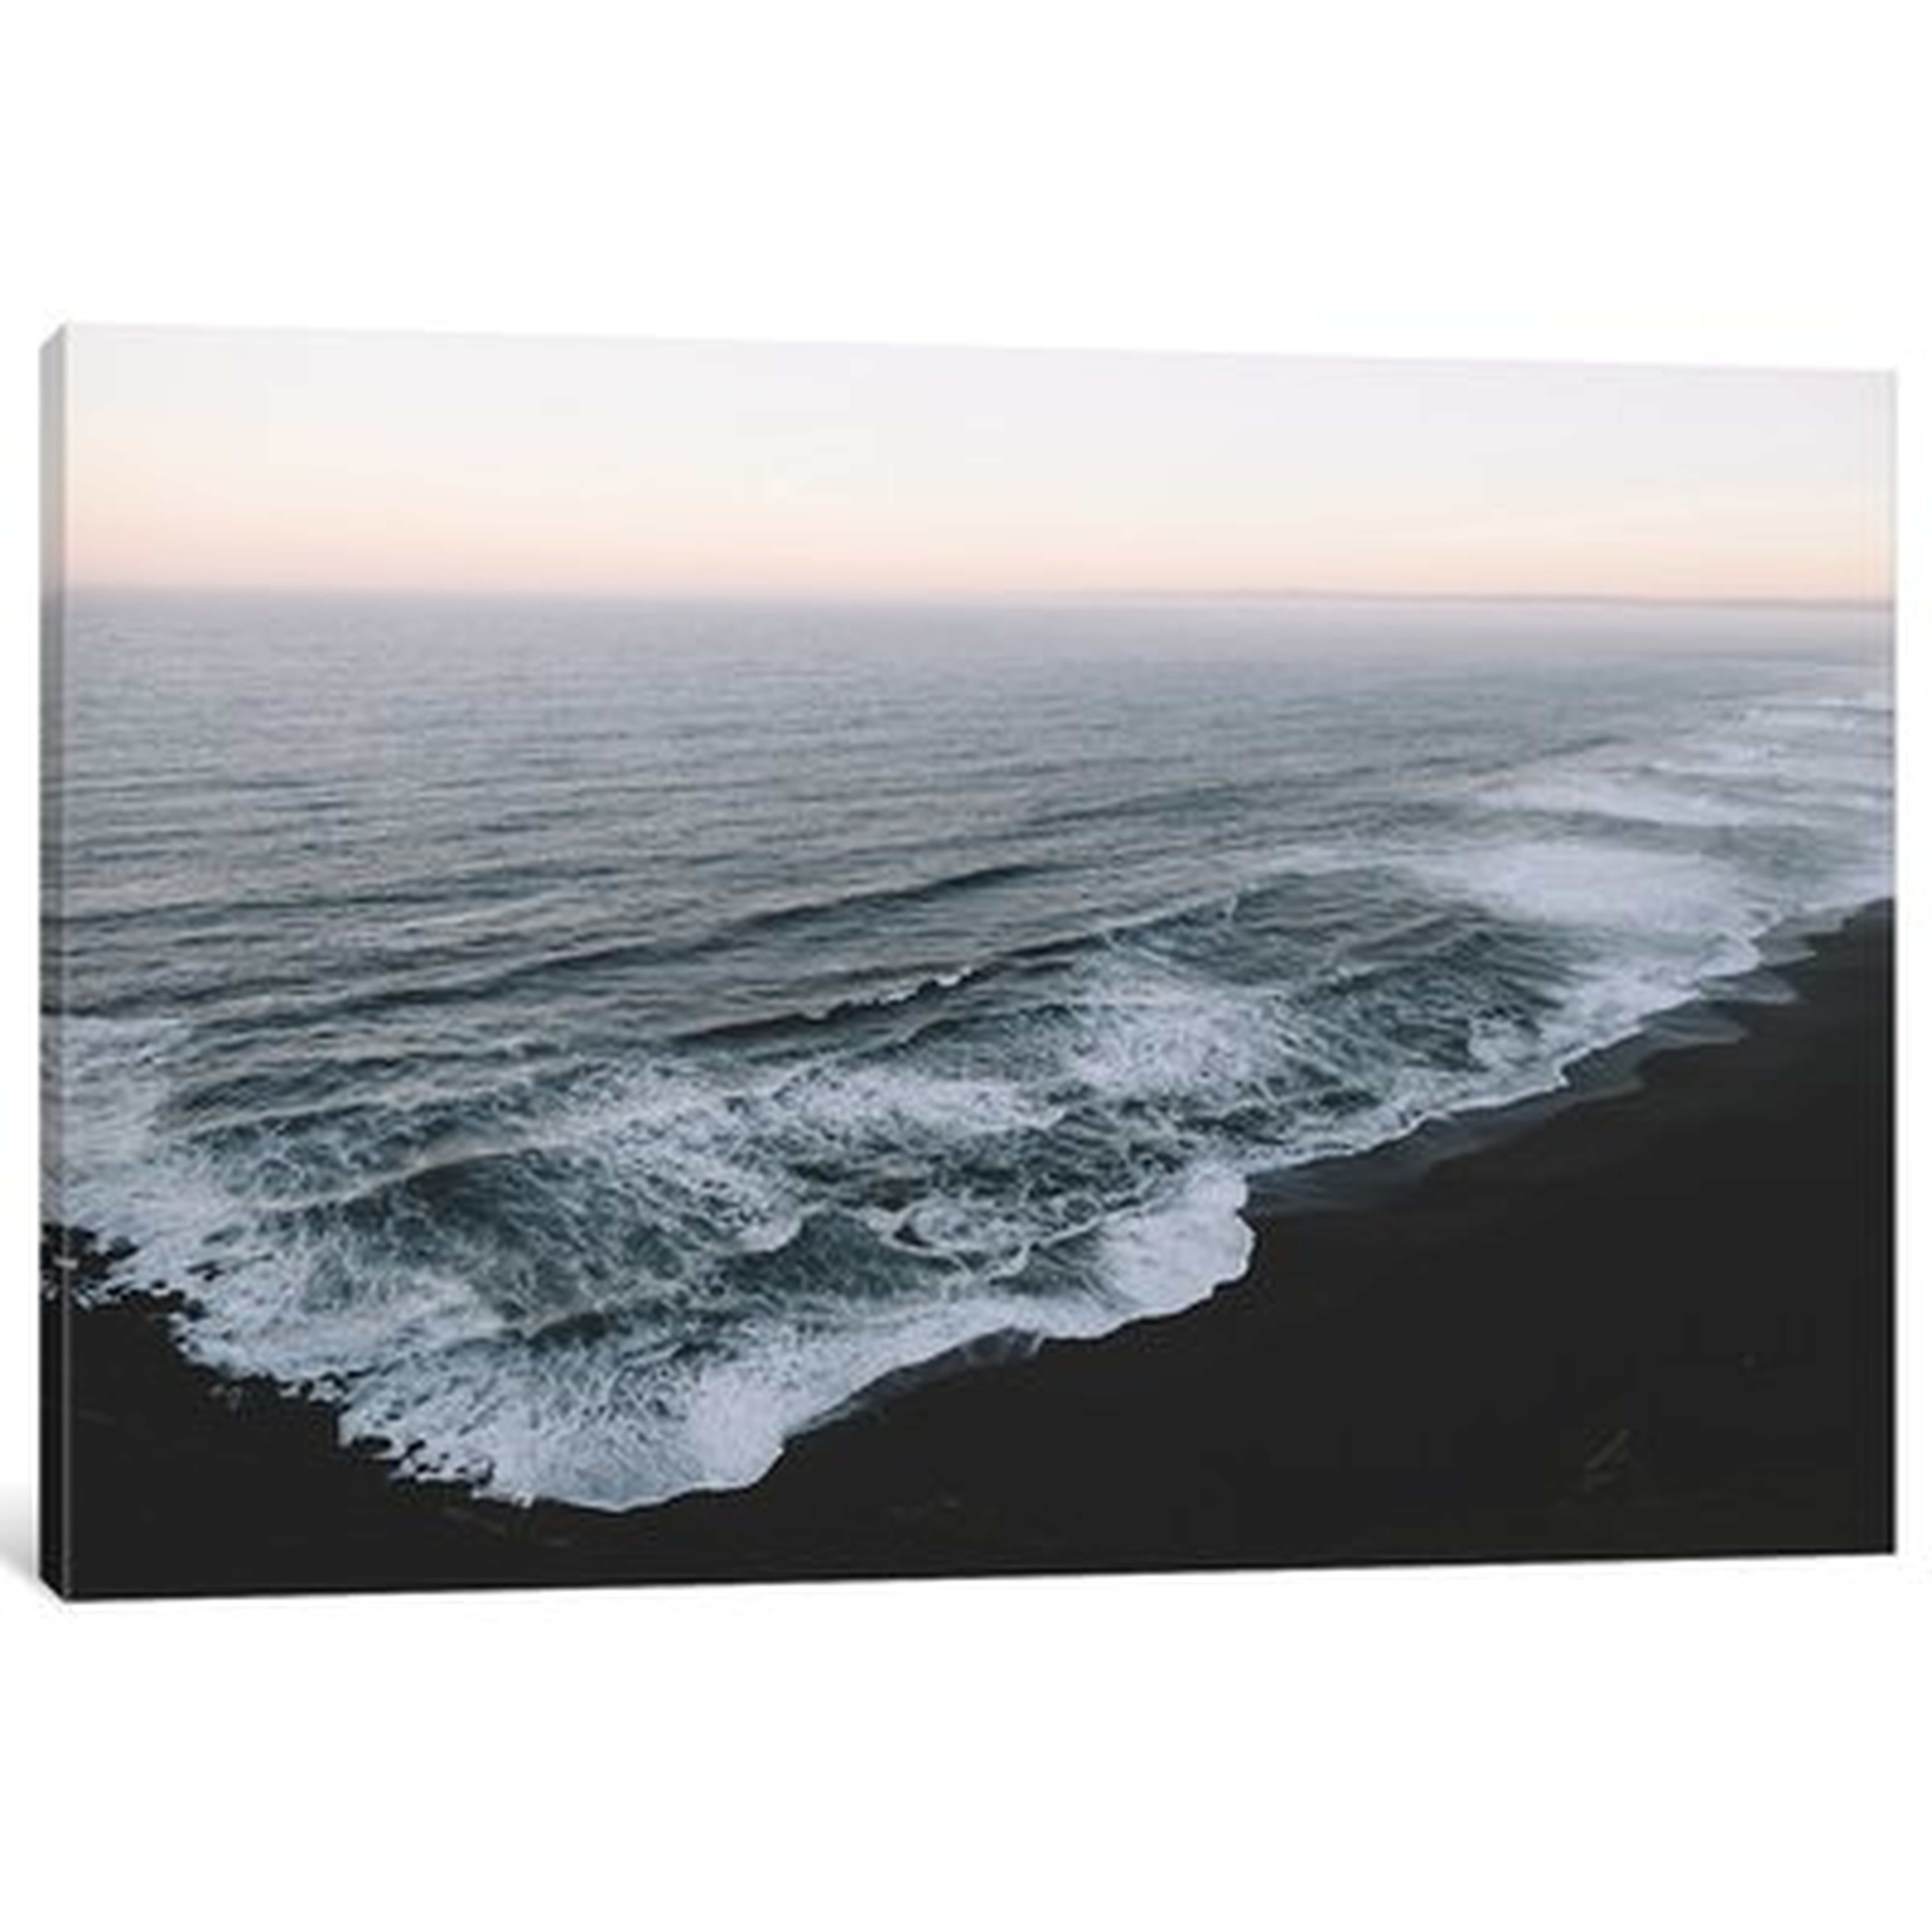 Point Reyes Ocean Glow by Christopher Kerksieck - Wrapped Canvas Photograph Print - AllModern